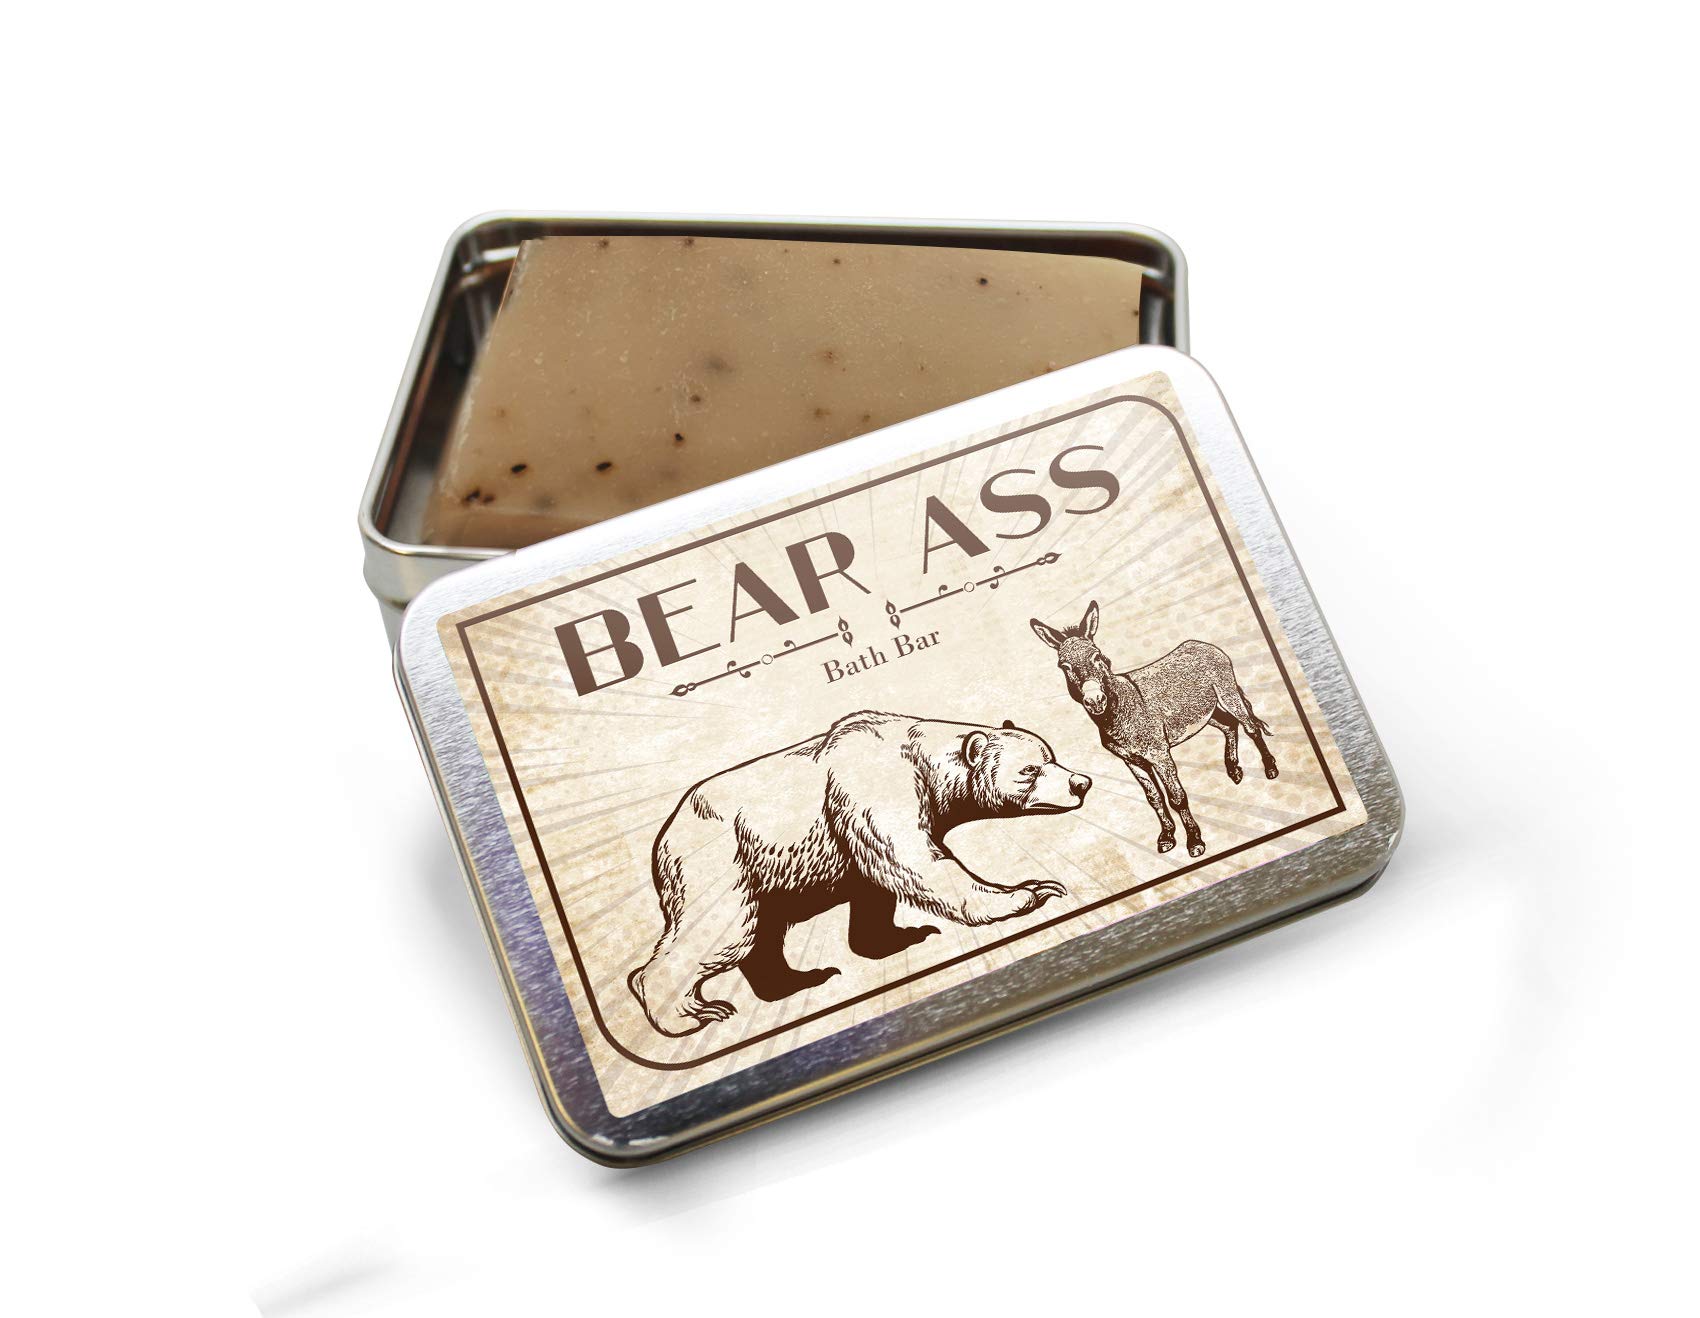 Bear Ass Bath Bar - Funny Vintage Bear and Donkey Design - Novelty Bath Soap for Men - Coffee Soap, Handcrafted, Made in the USA, Contains Real Ground Coffee